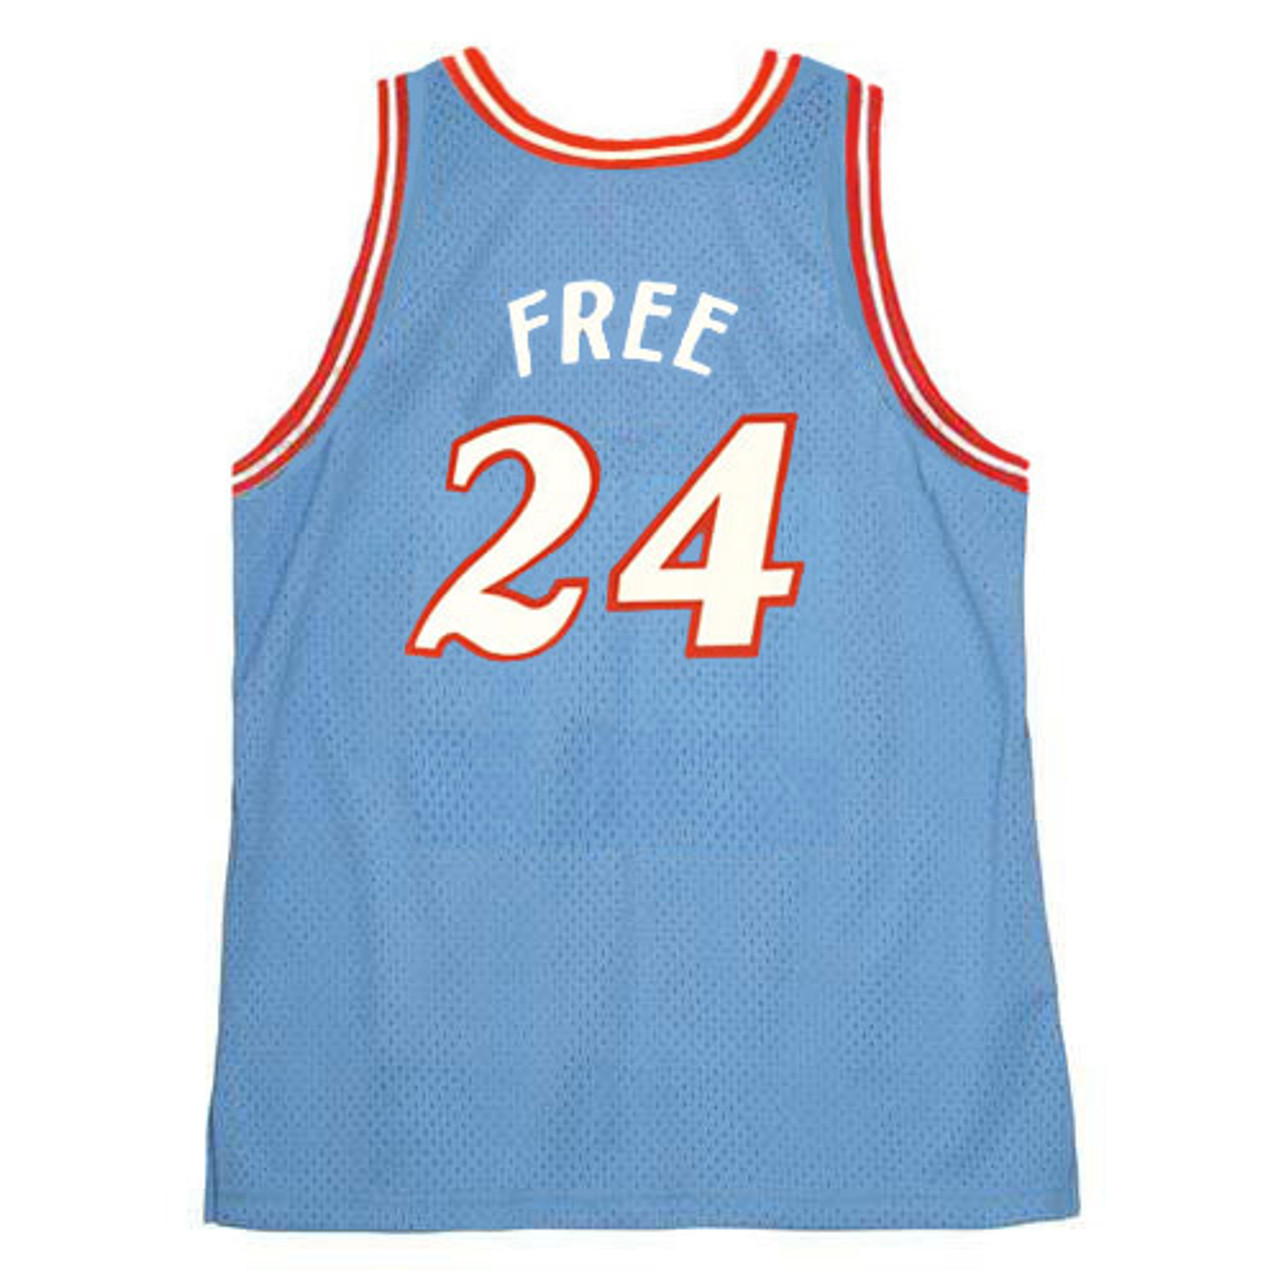 WORLD B. FREE  San Diego Clippers 1980 Throwback NBA Basketball Jersey